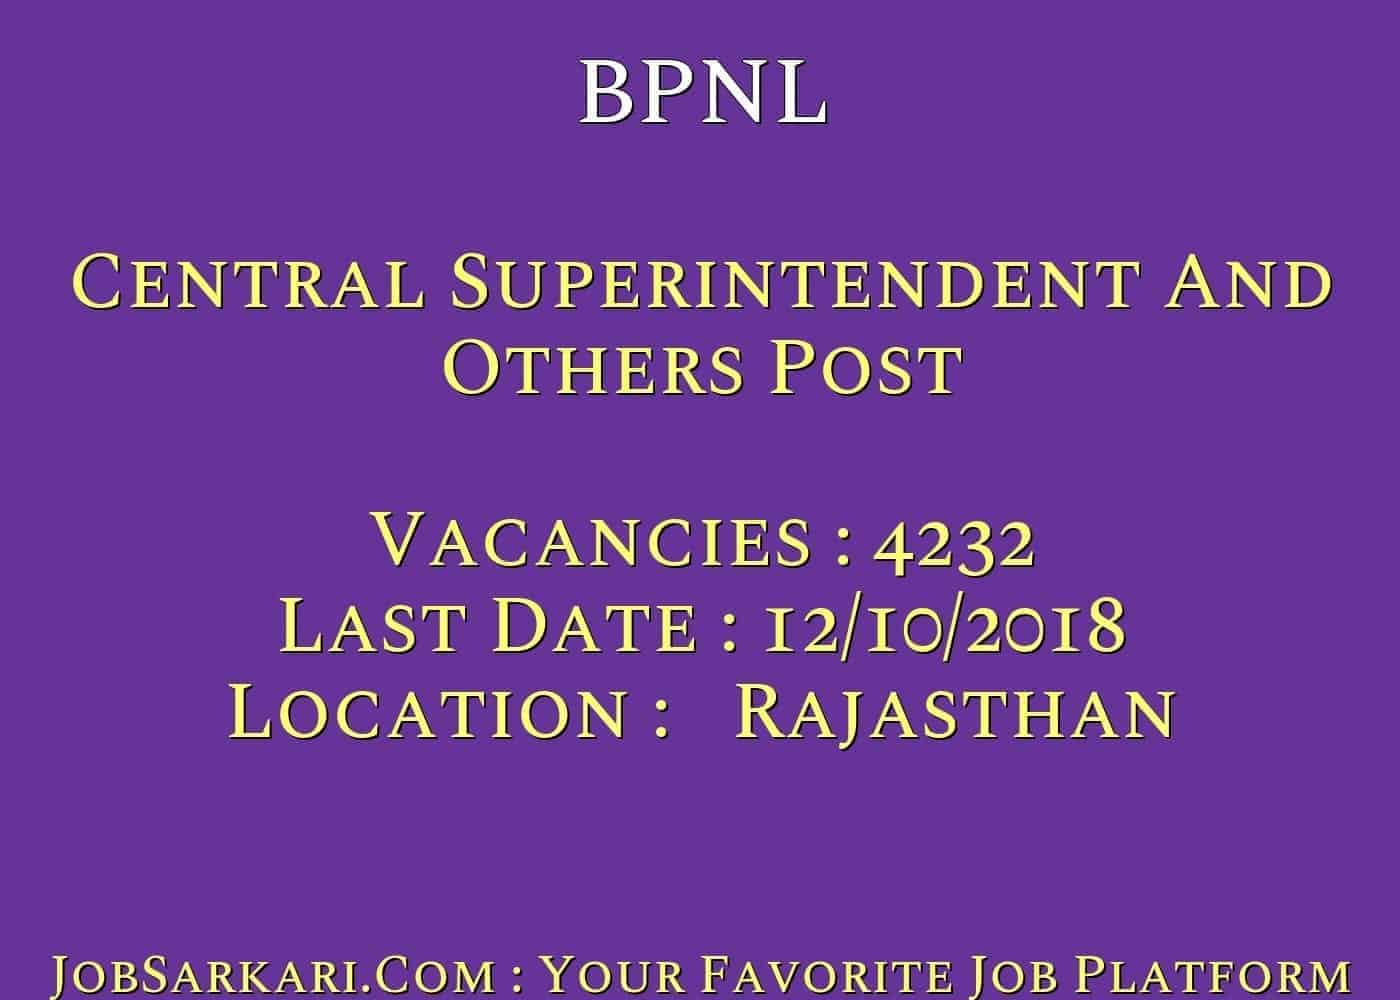 BPNL For Central Superintendent And Others Post